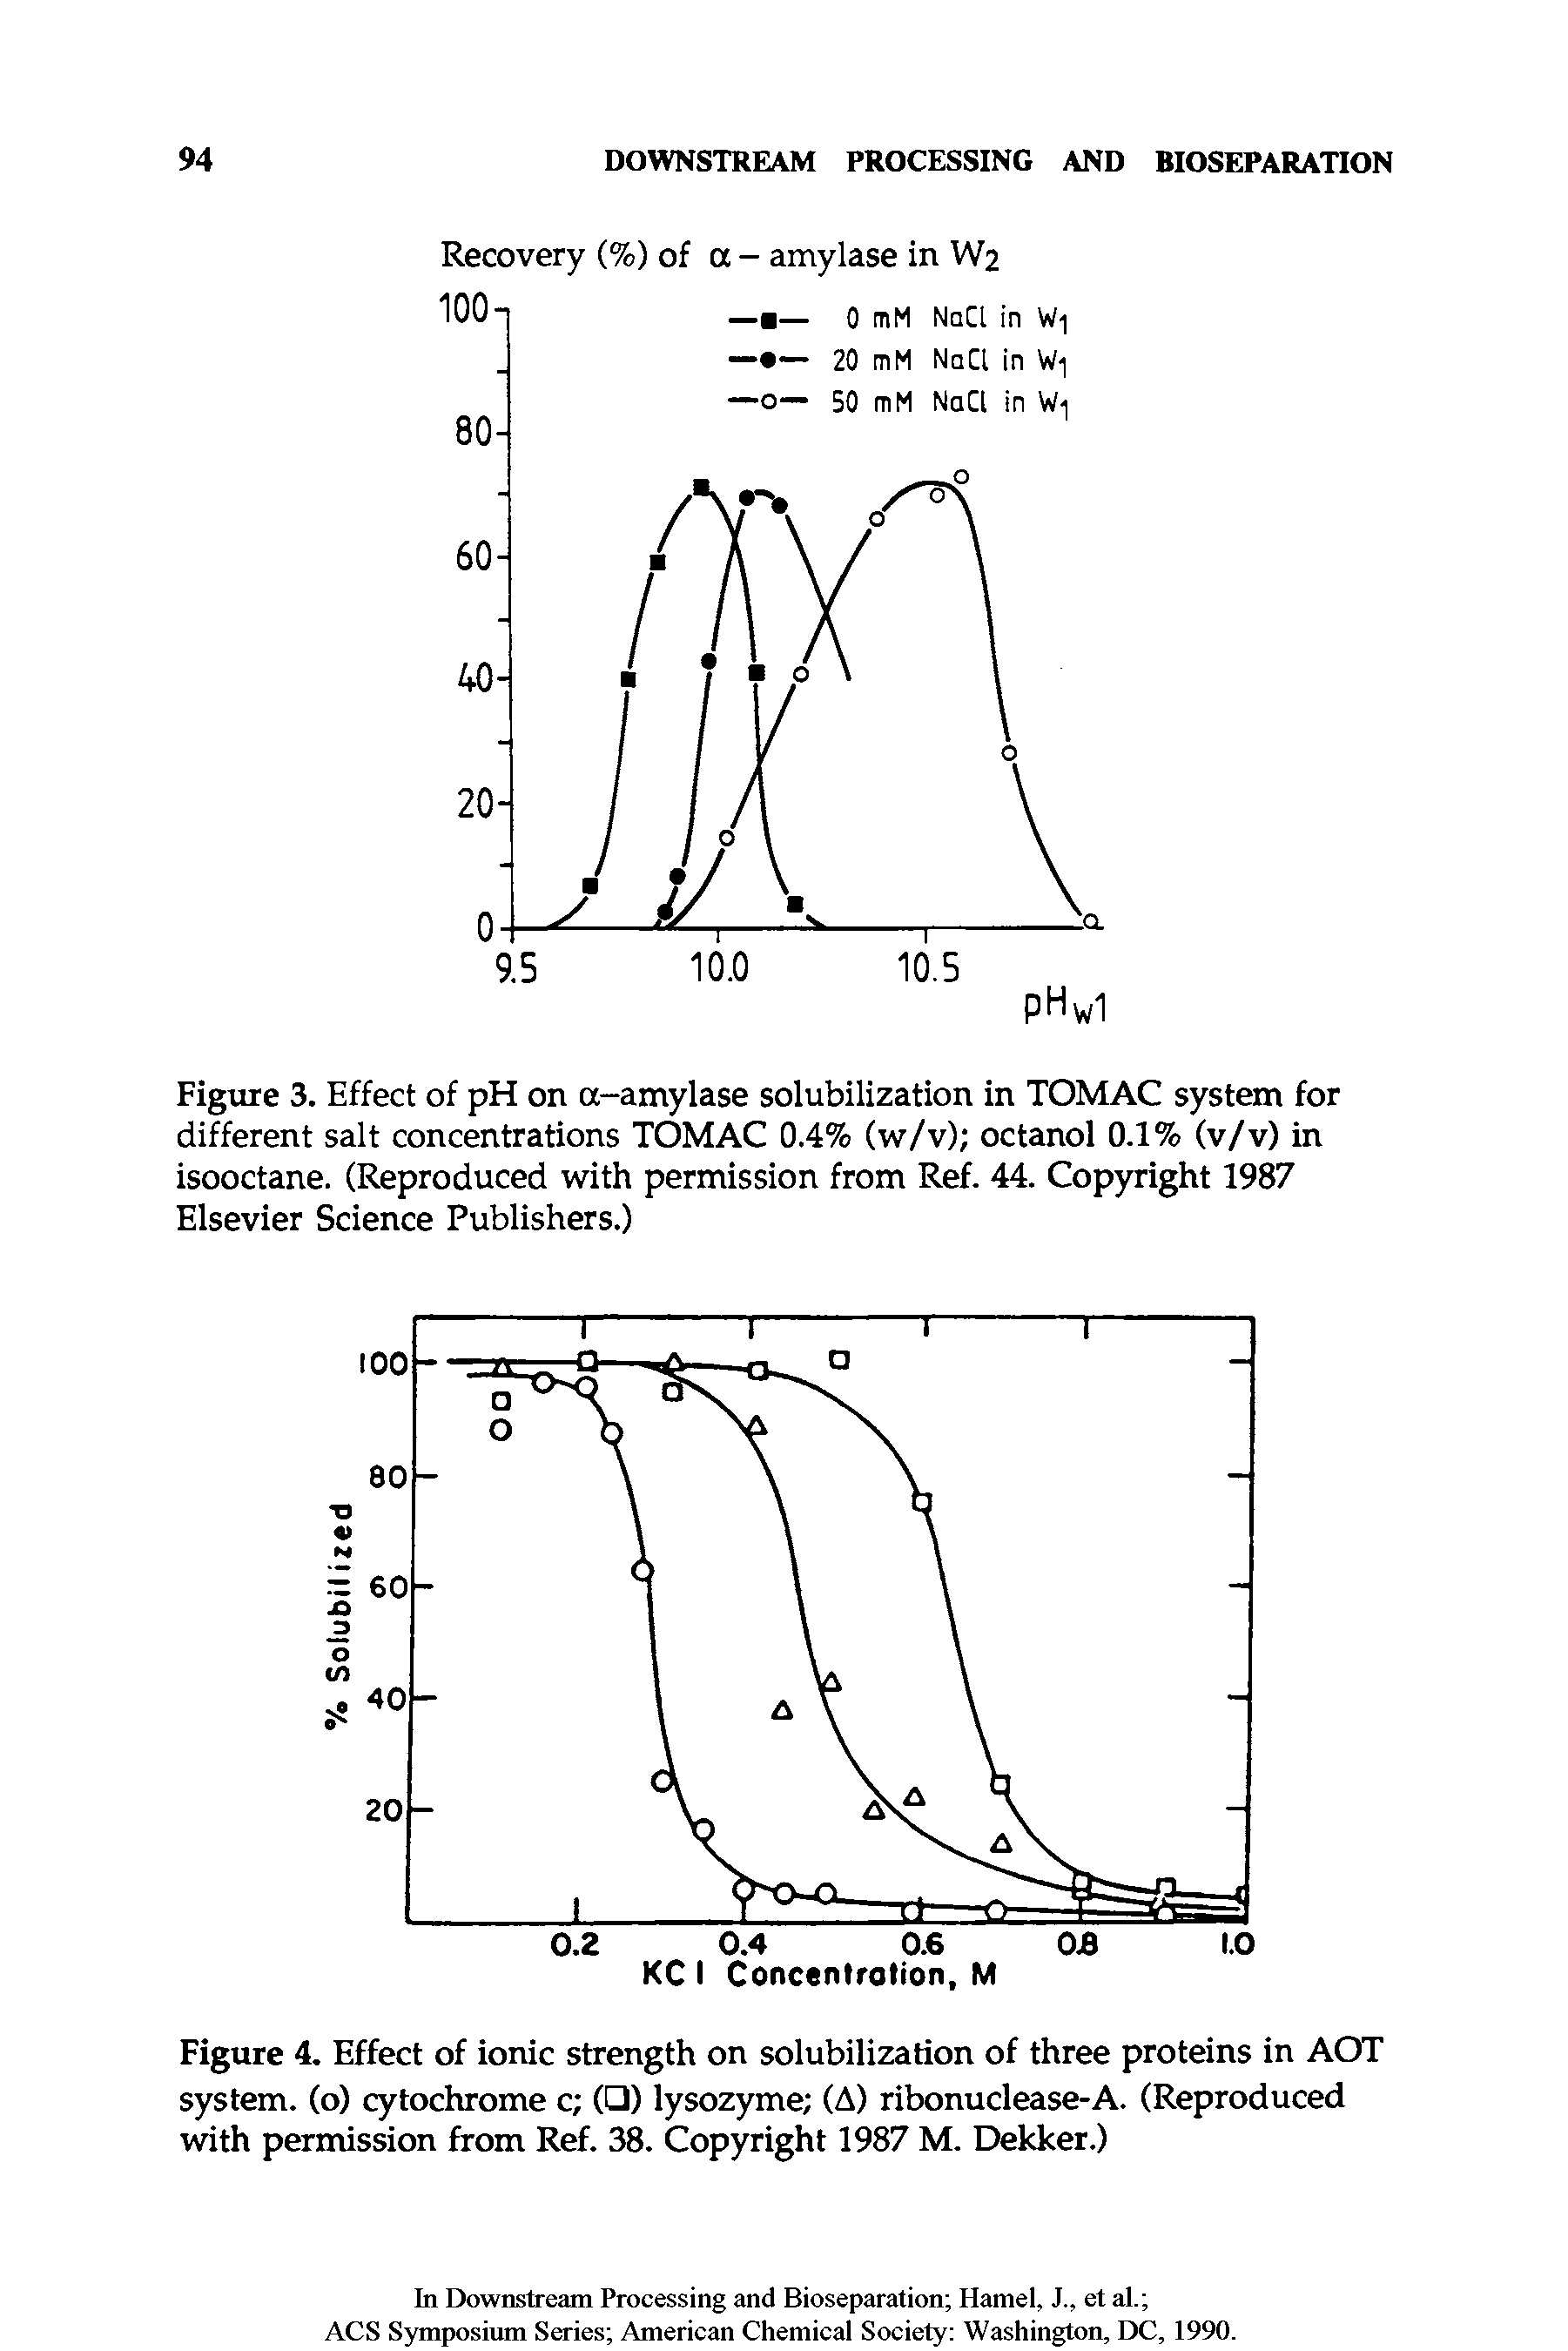 Figure 4. Effect of ionic strength on solubilization of three proteins in AOT system, (o) cytochrome c ( ) lysozyme (A) ribonuclease-A. (Reproduced with permission from Ref. 38. Copyright 1987 M. Dekker.)...